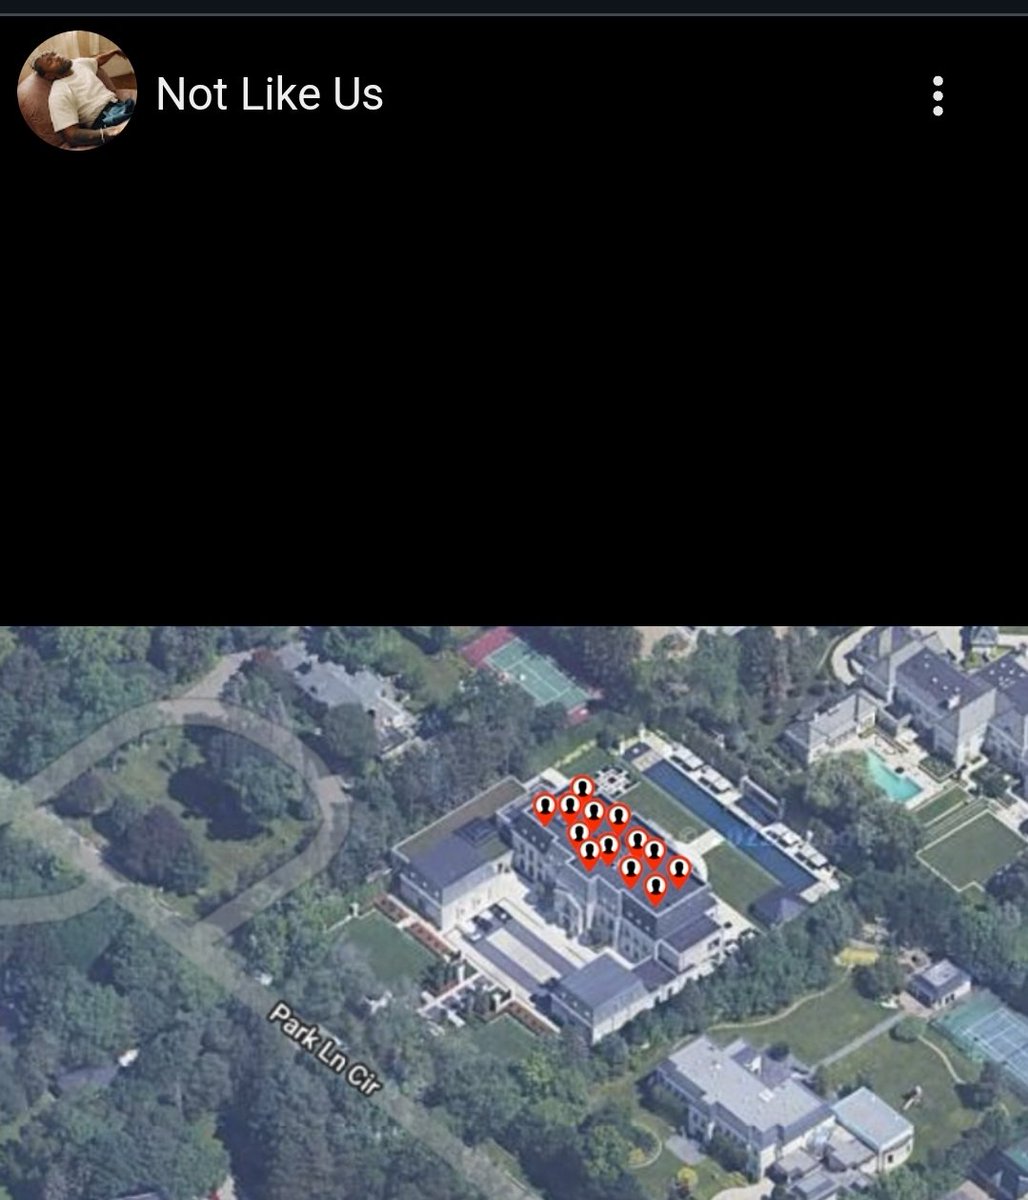 Bro is this the shit that shows you the registered sex offenders in your neighborhood?! With all of them in Drake's house? I. Am. Yelling! 😂😂😂😭😭😭